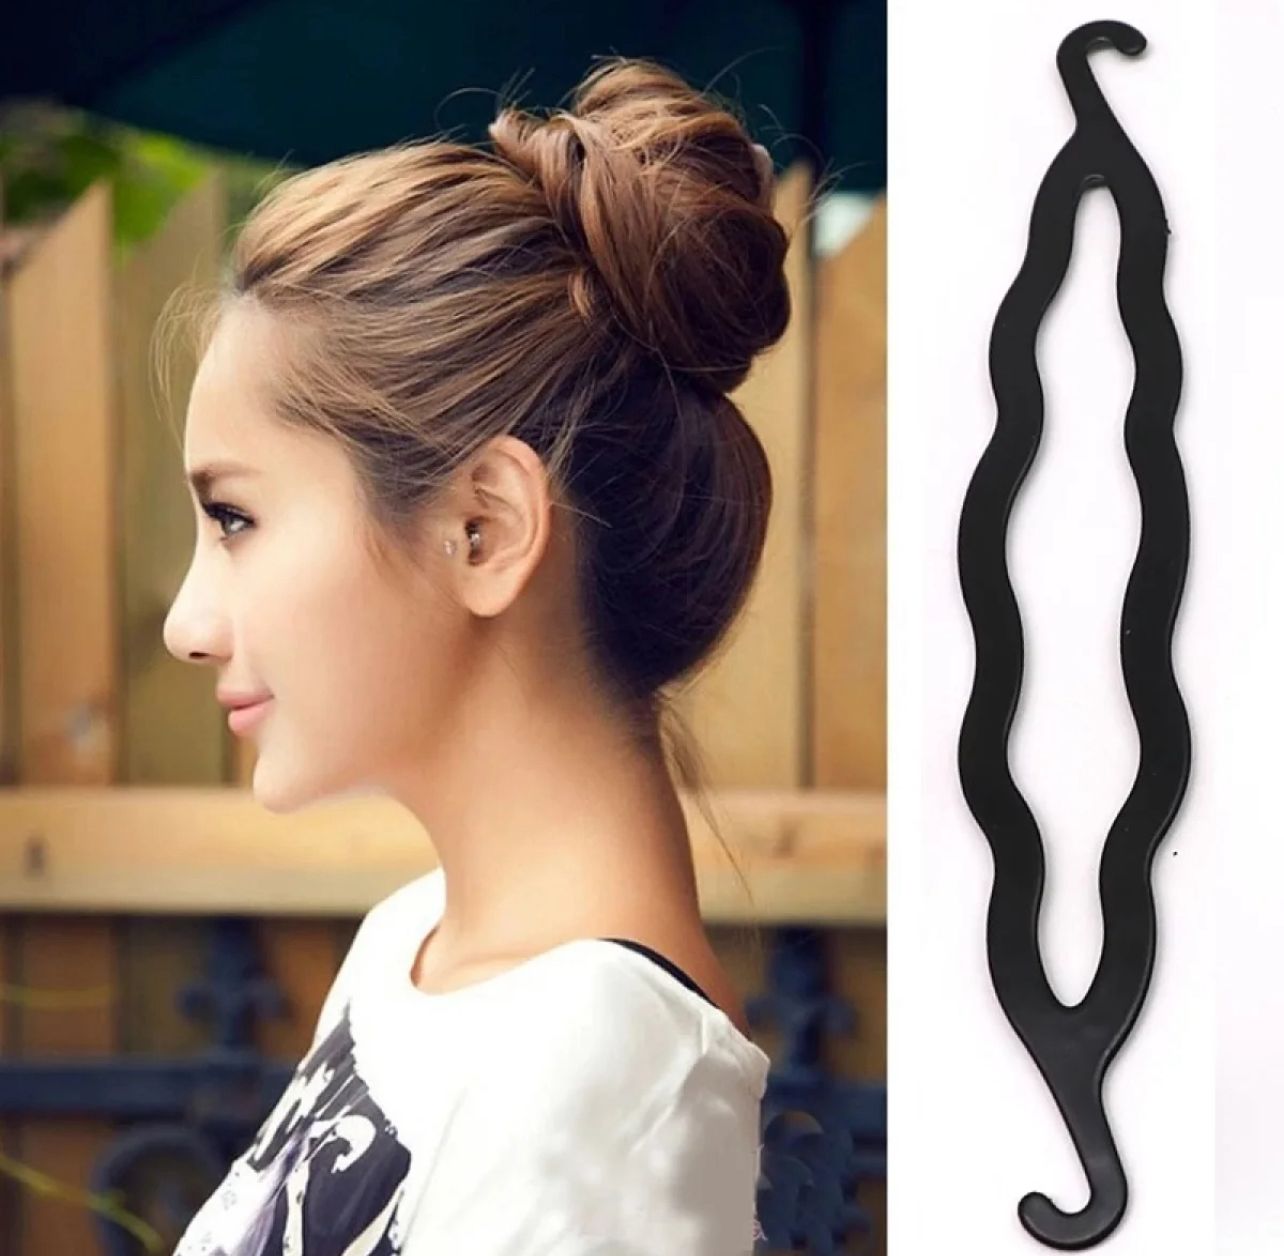 Girls hair styling accessories set 6pcs/set for making buns, twists and creative hair styling